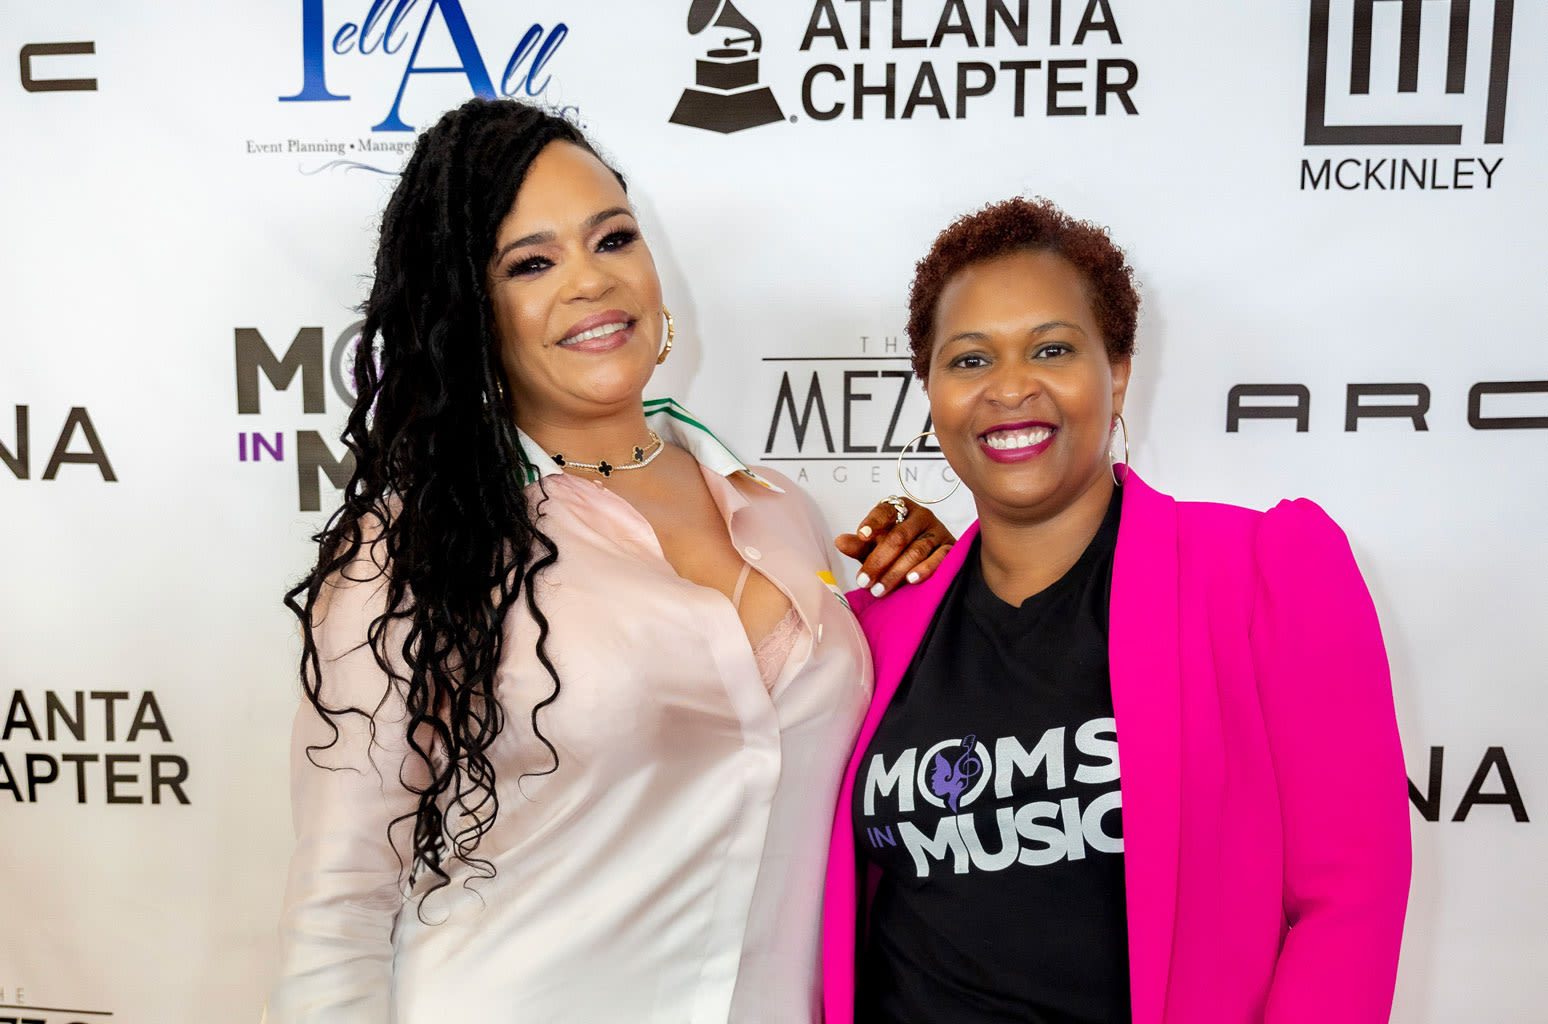 Moms In Music Founder Talks Supporting Women in Music Through Journey of Motherhood